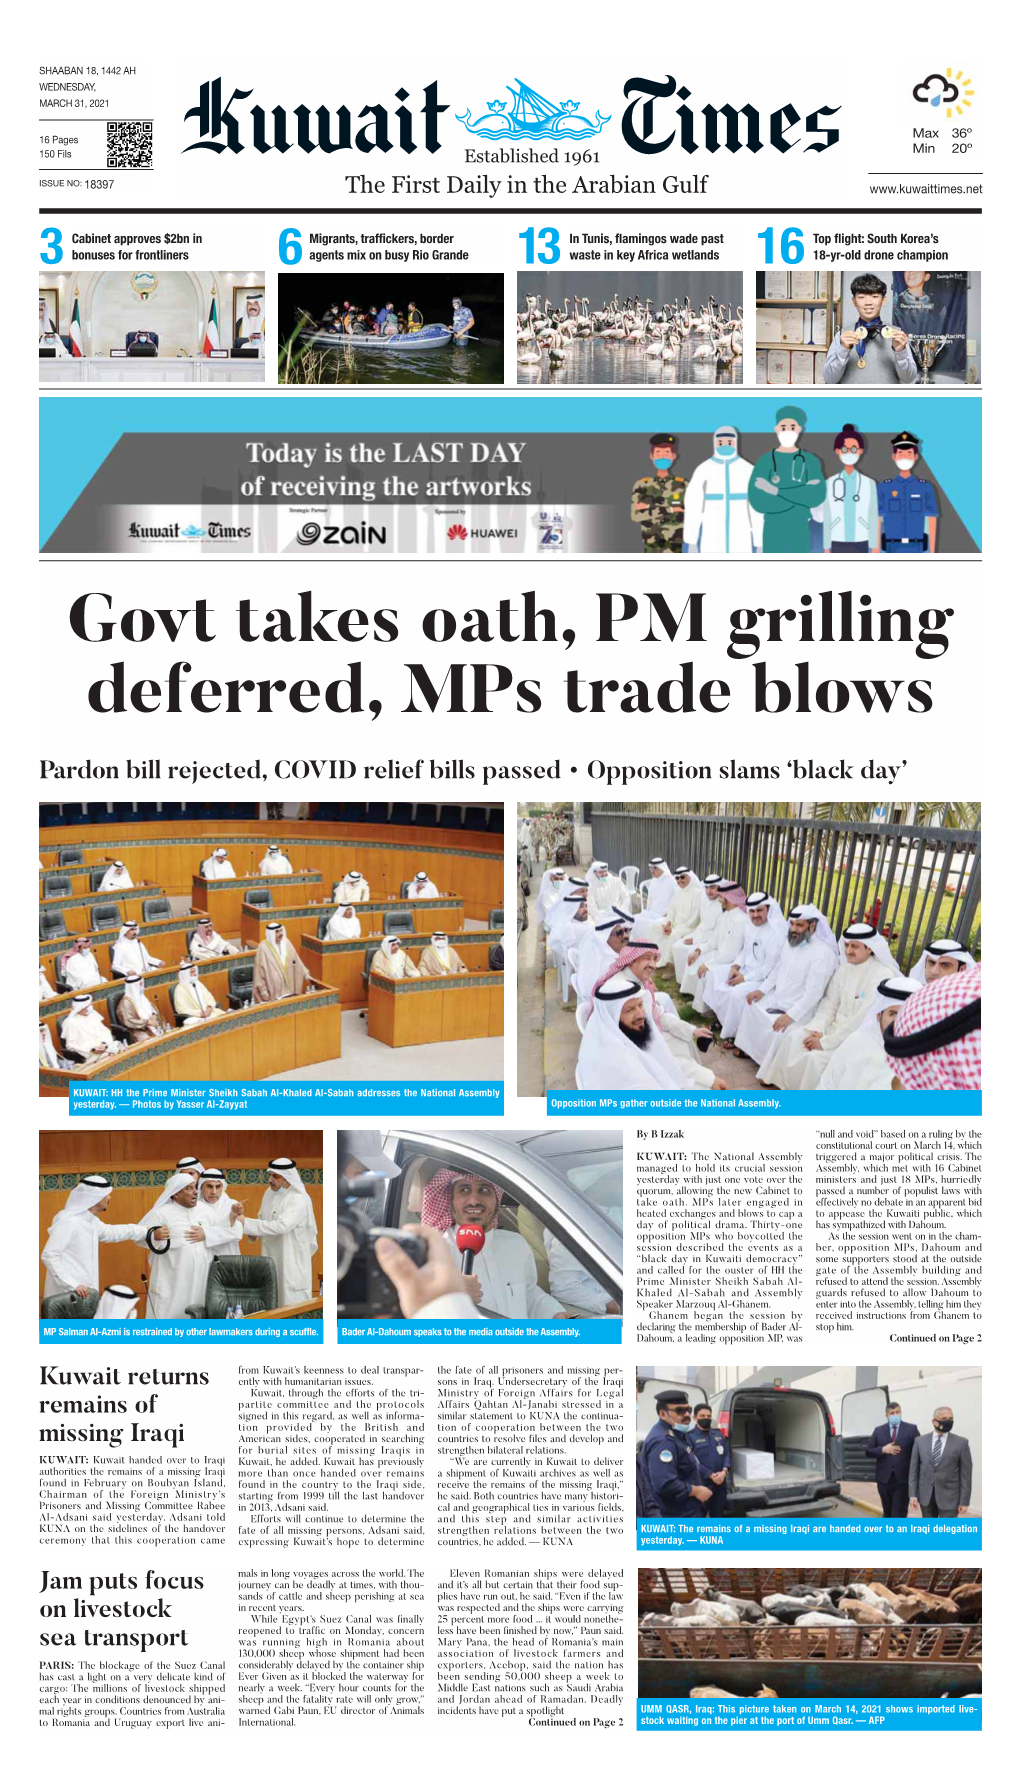 Govt Takes Oath, PM Grilling Deferred, Mps Trade Blows